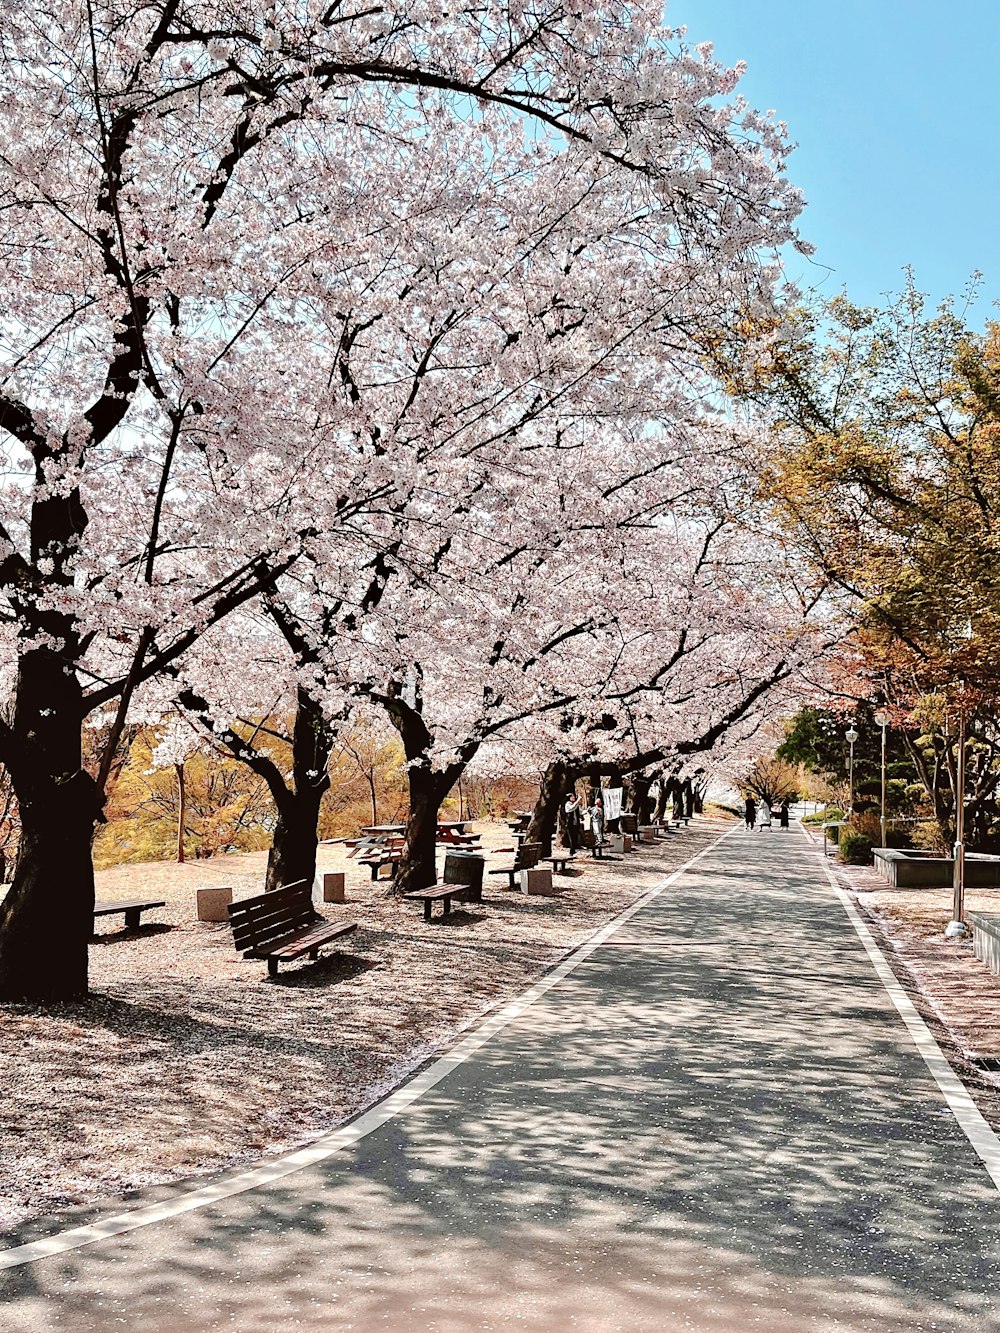 a park lined with benches and trees with pink flowers